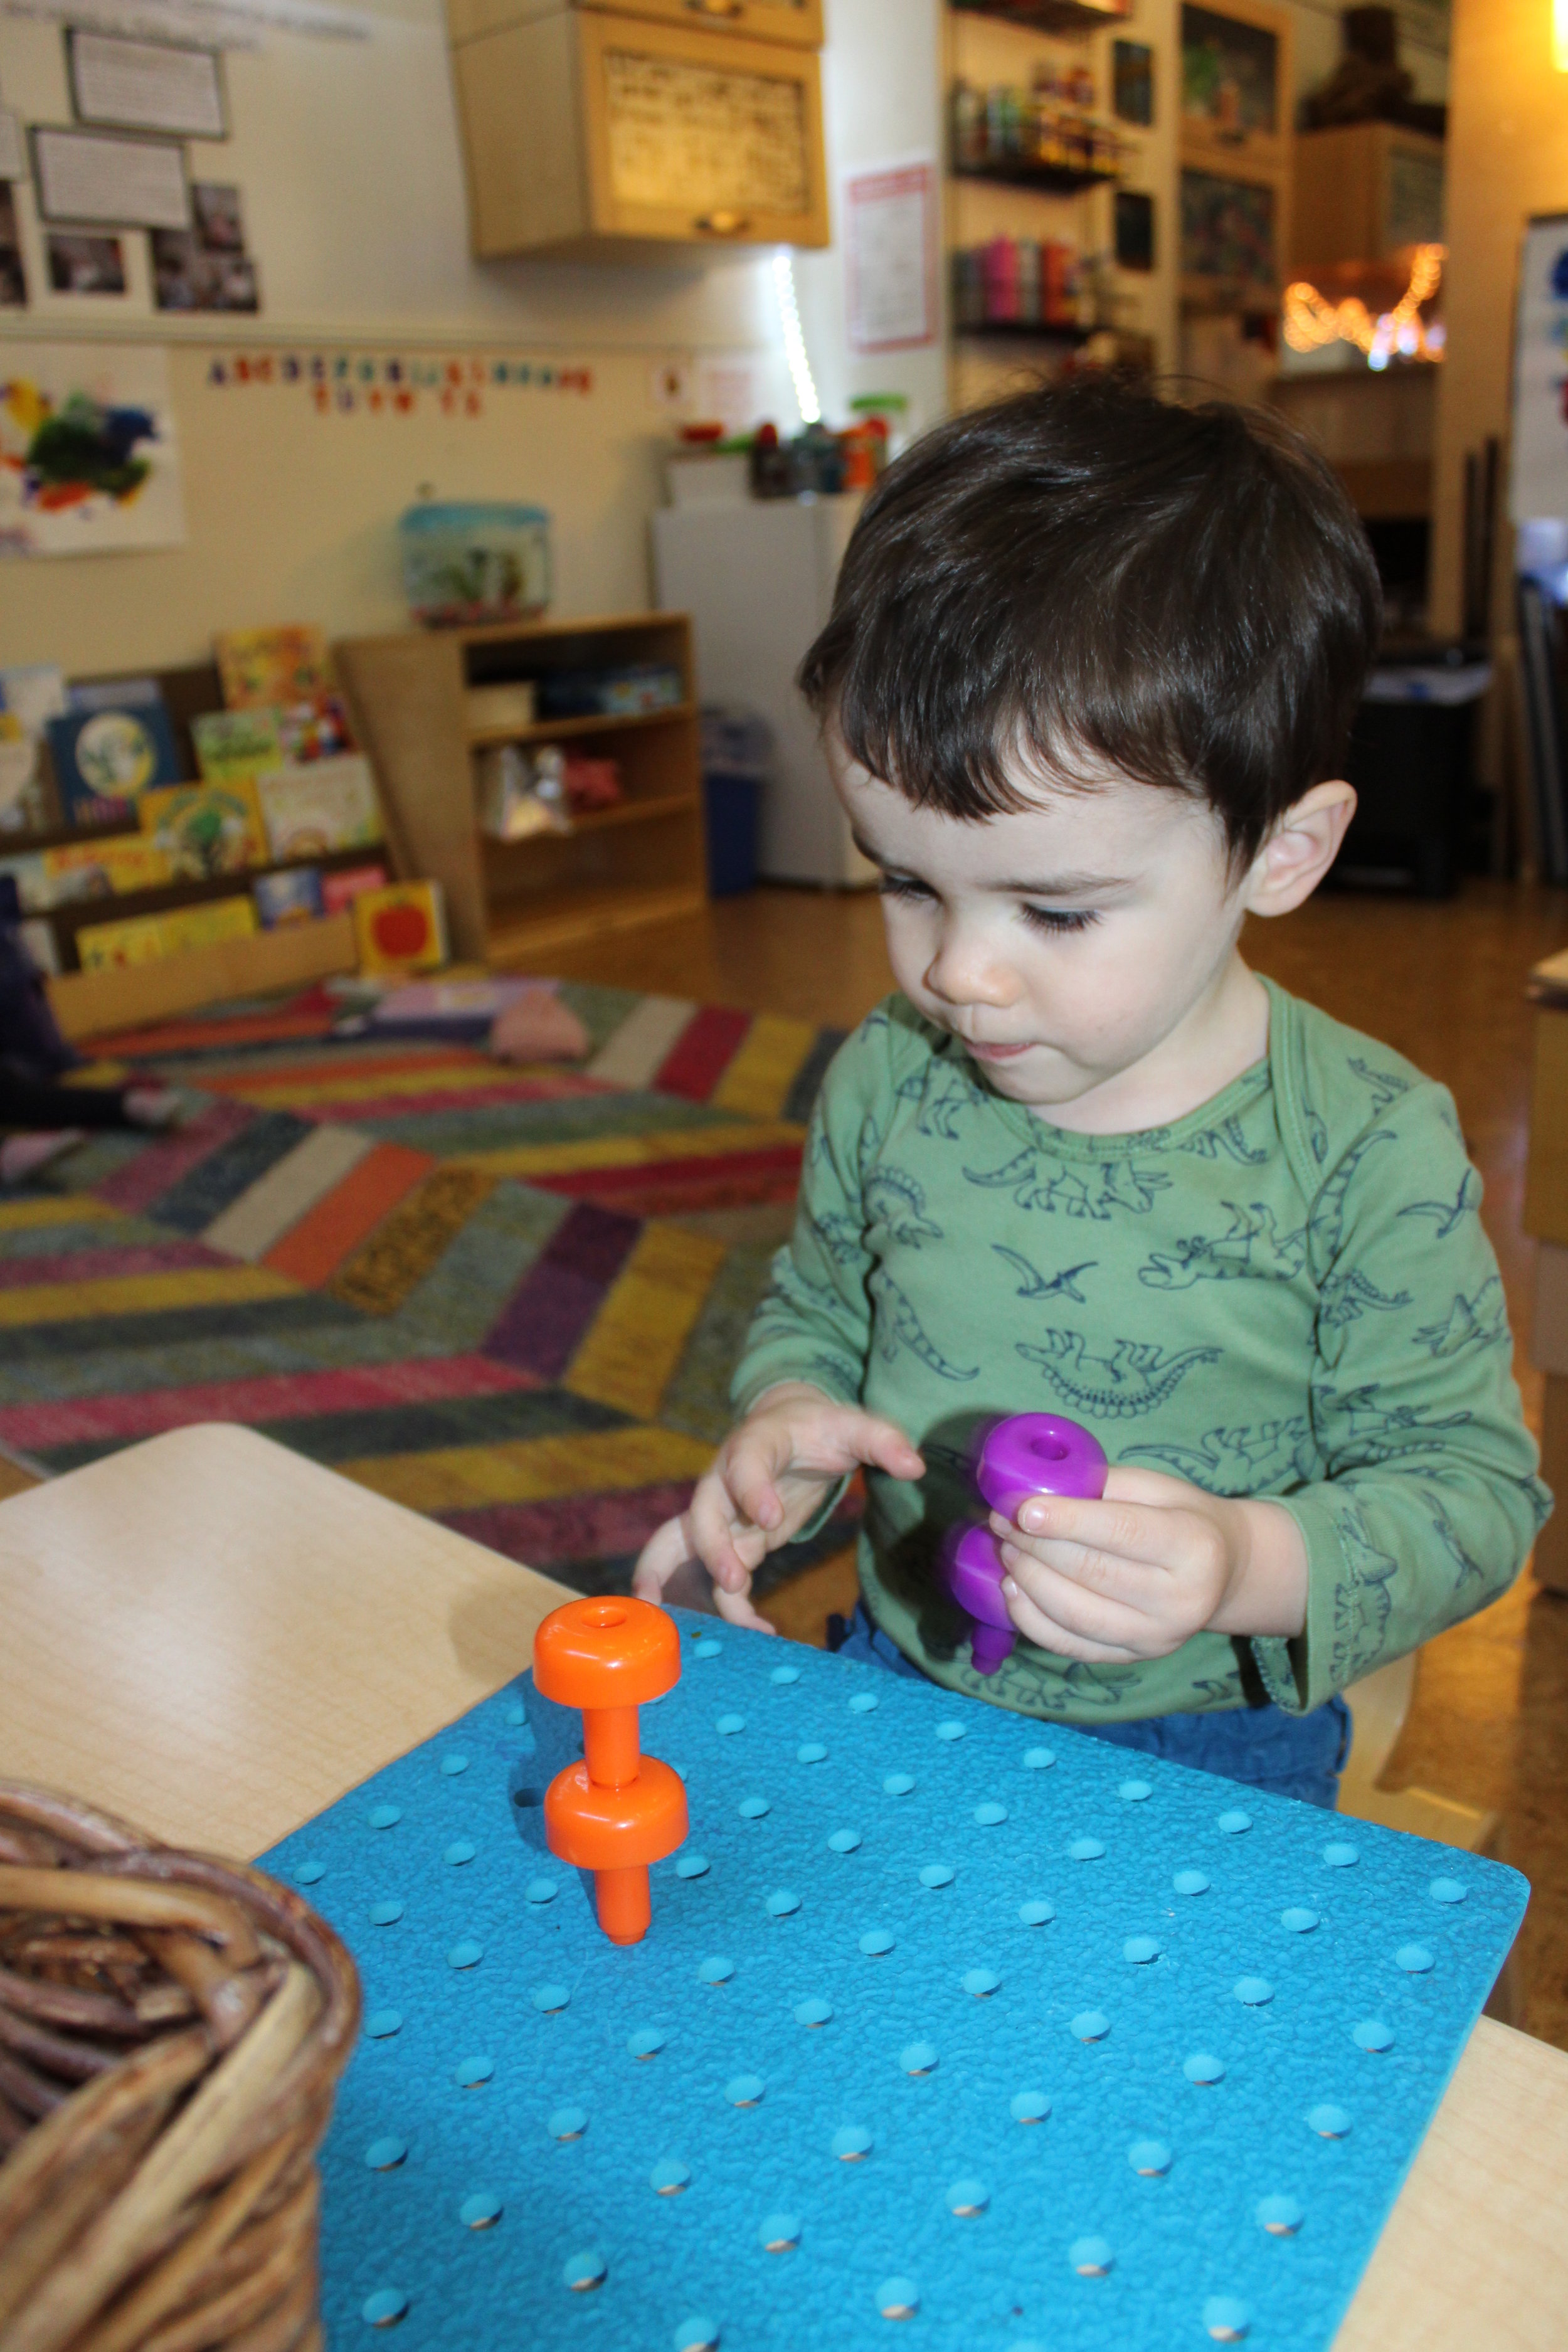  Pegs are sorting, stacking, and color recognition manipulative toy.  They build fine motor skills, develops and strengthens visual perception skills, hand-eye coordination, motor coordination, imagination, and creativity.   